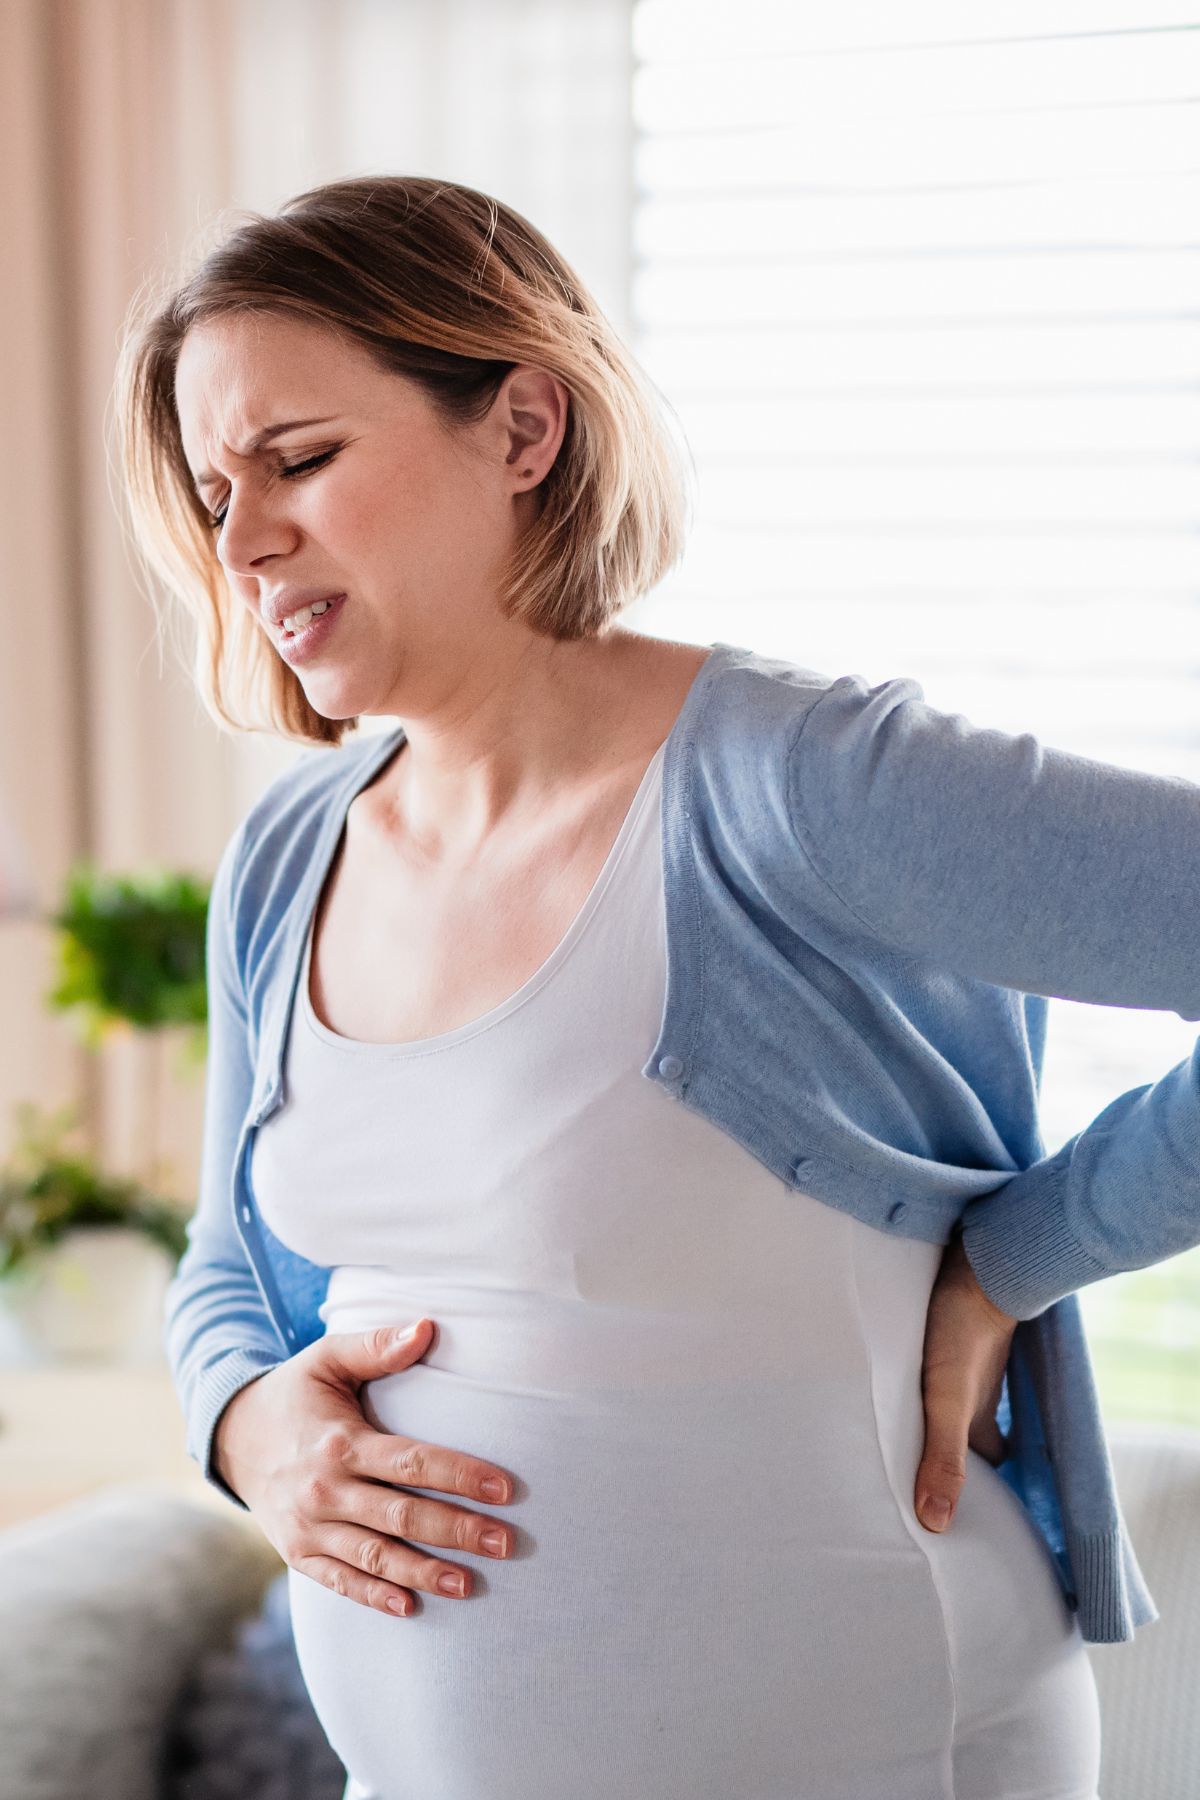 A pregnant woman hunches over in pain with a hand on her lower back and belly.